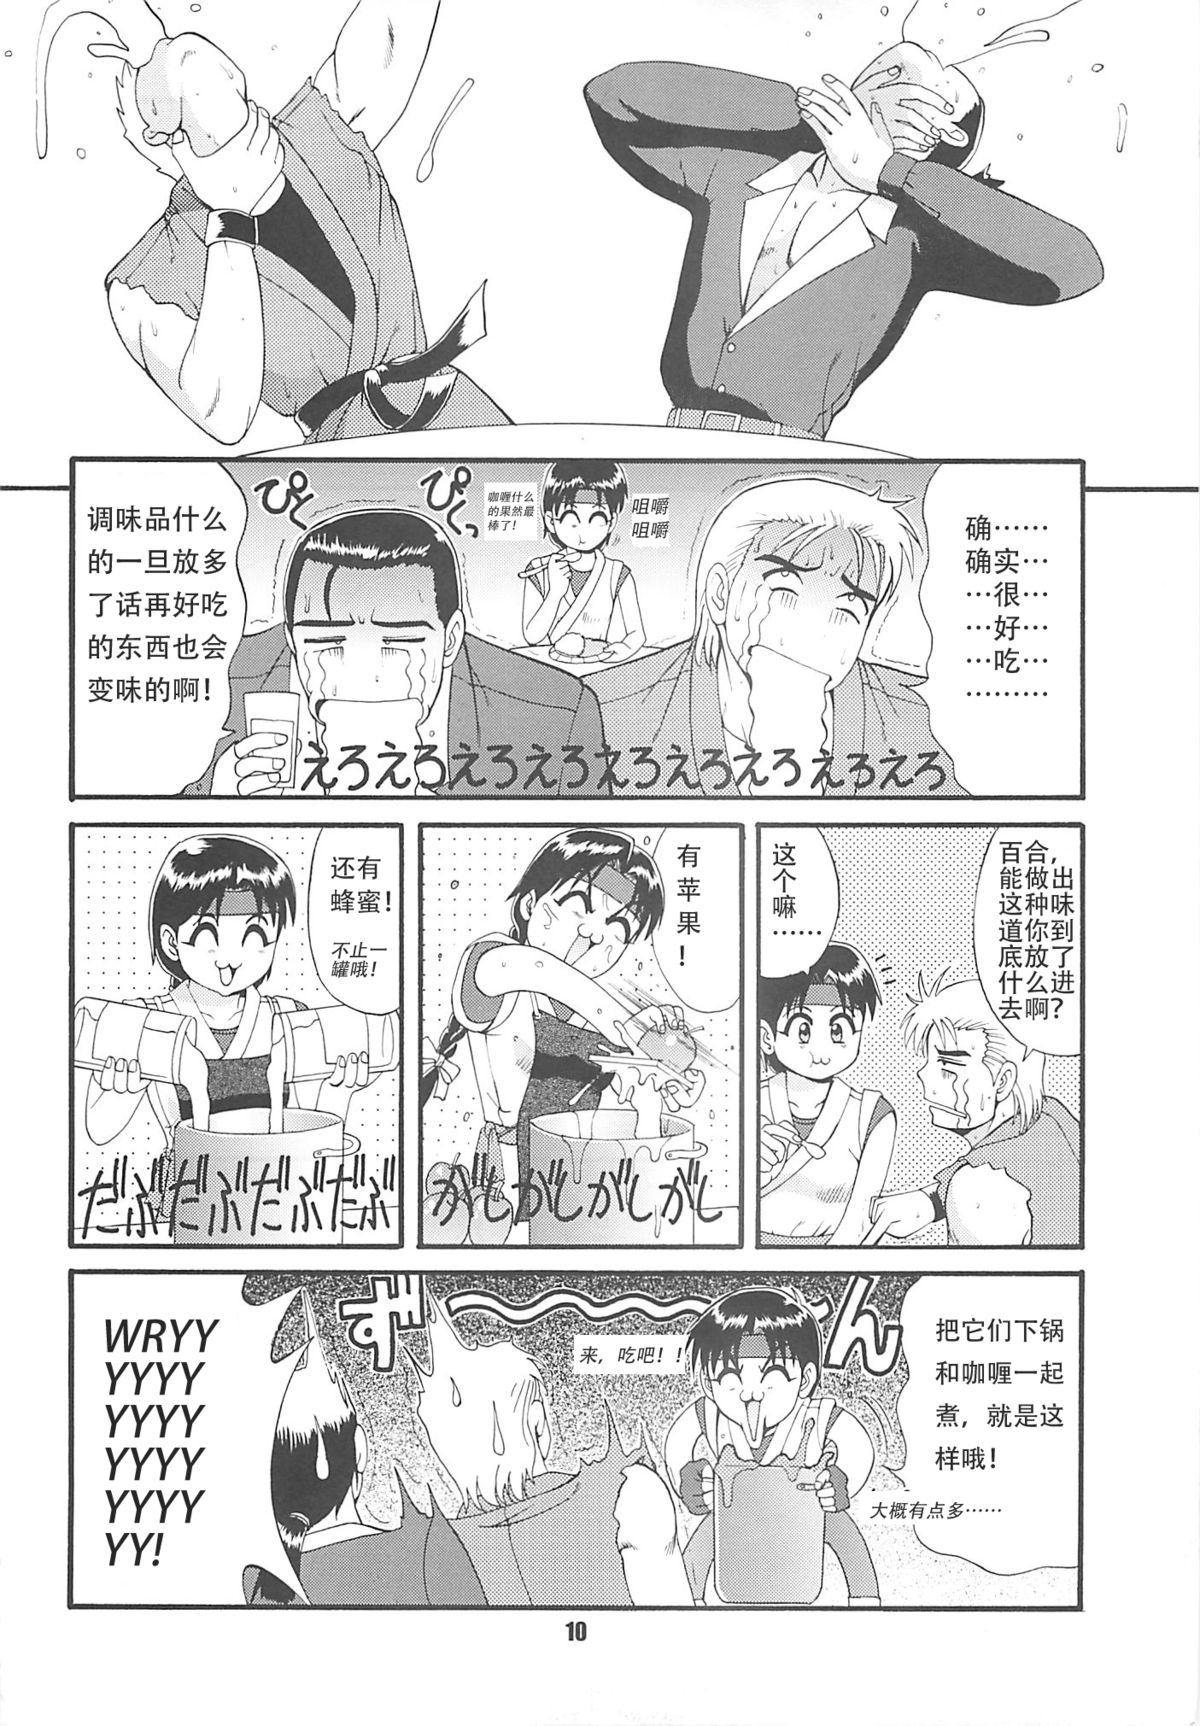 Amateurporn The Yuri & Friends '97 - King of fighters Male - Page 10